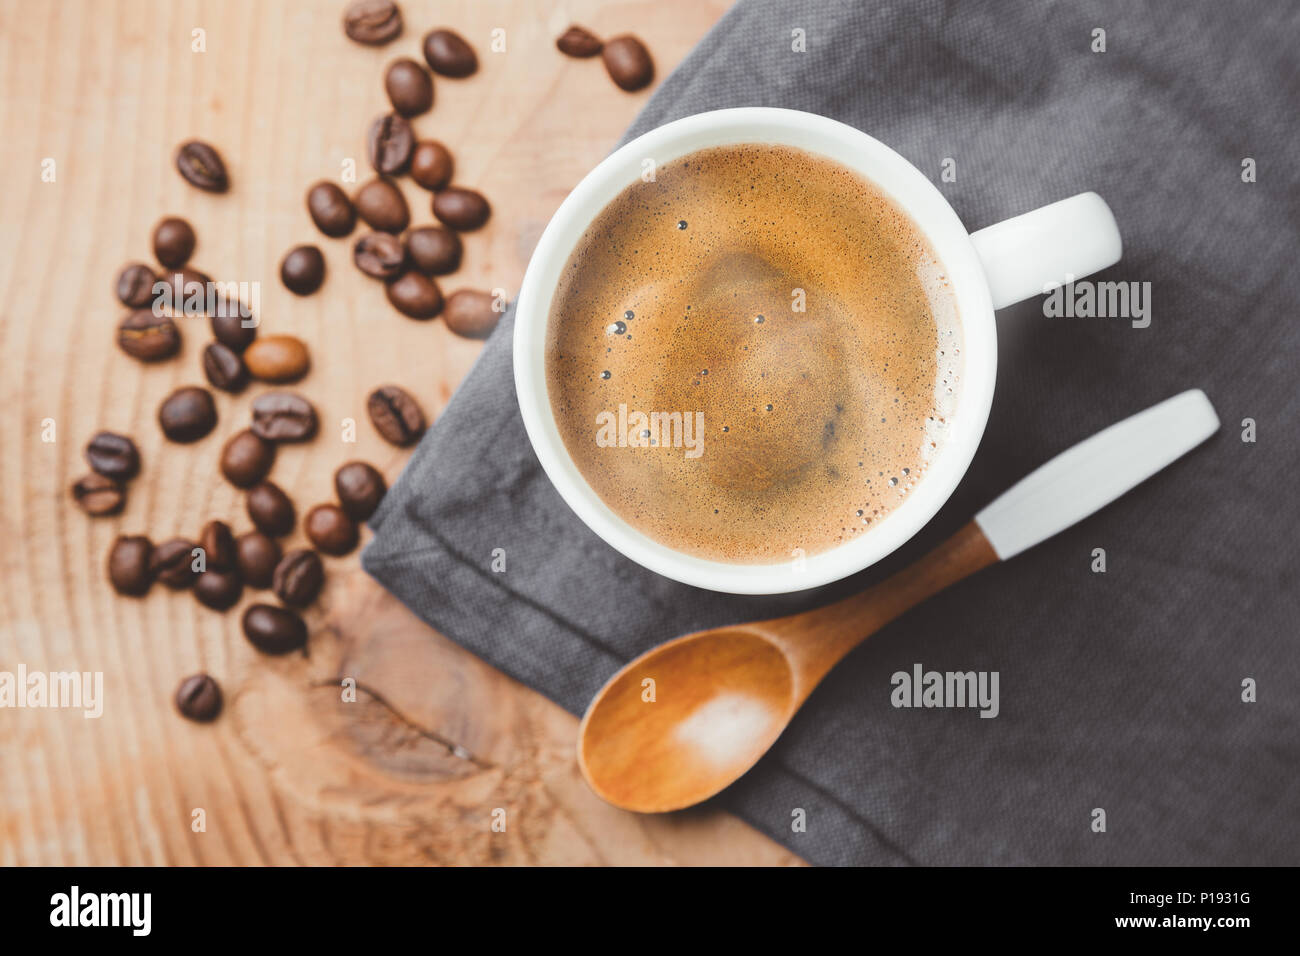 Cup of steaming coffee cup with a wooden spoon and roasted coffee beans on gray textile . Top view, flat lay Stock Photo